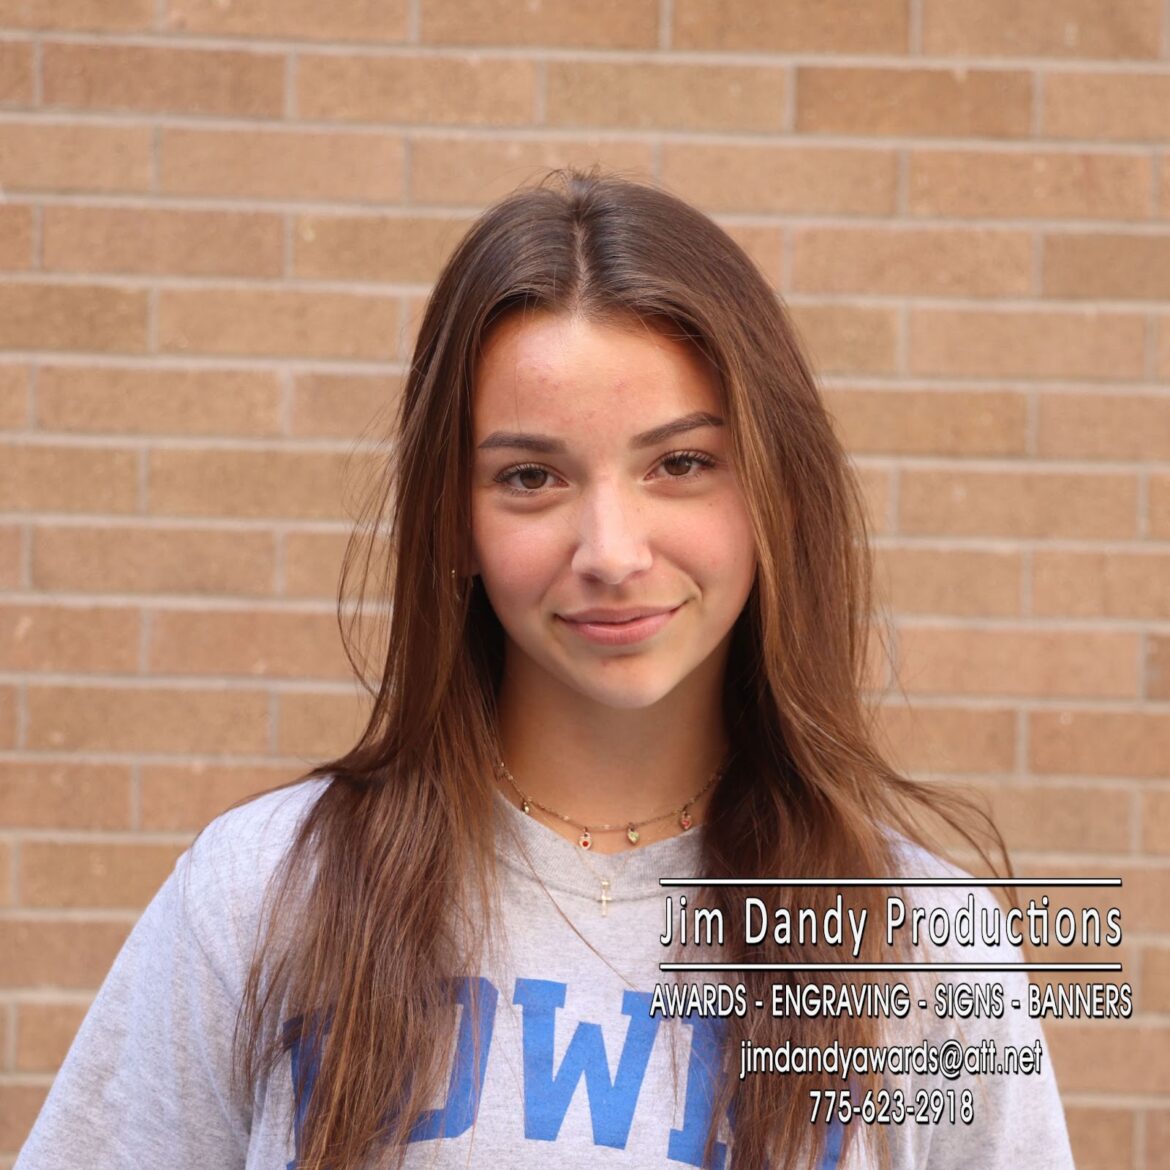 Damiena Mentaberry selected as Athlete of the Week